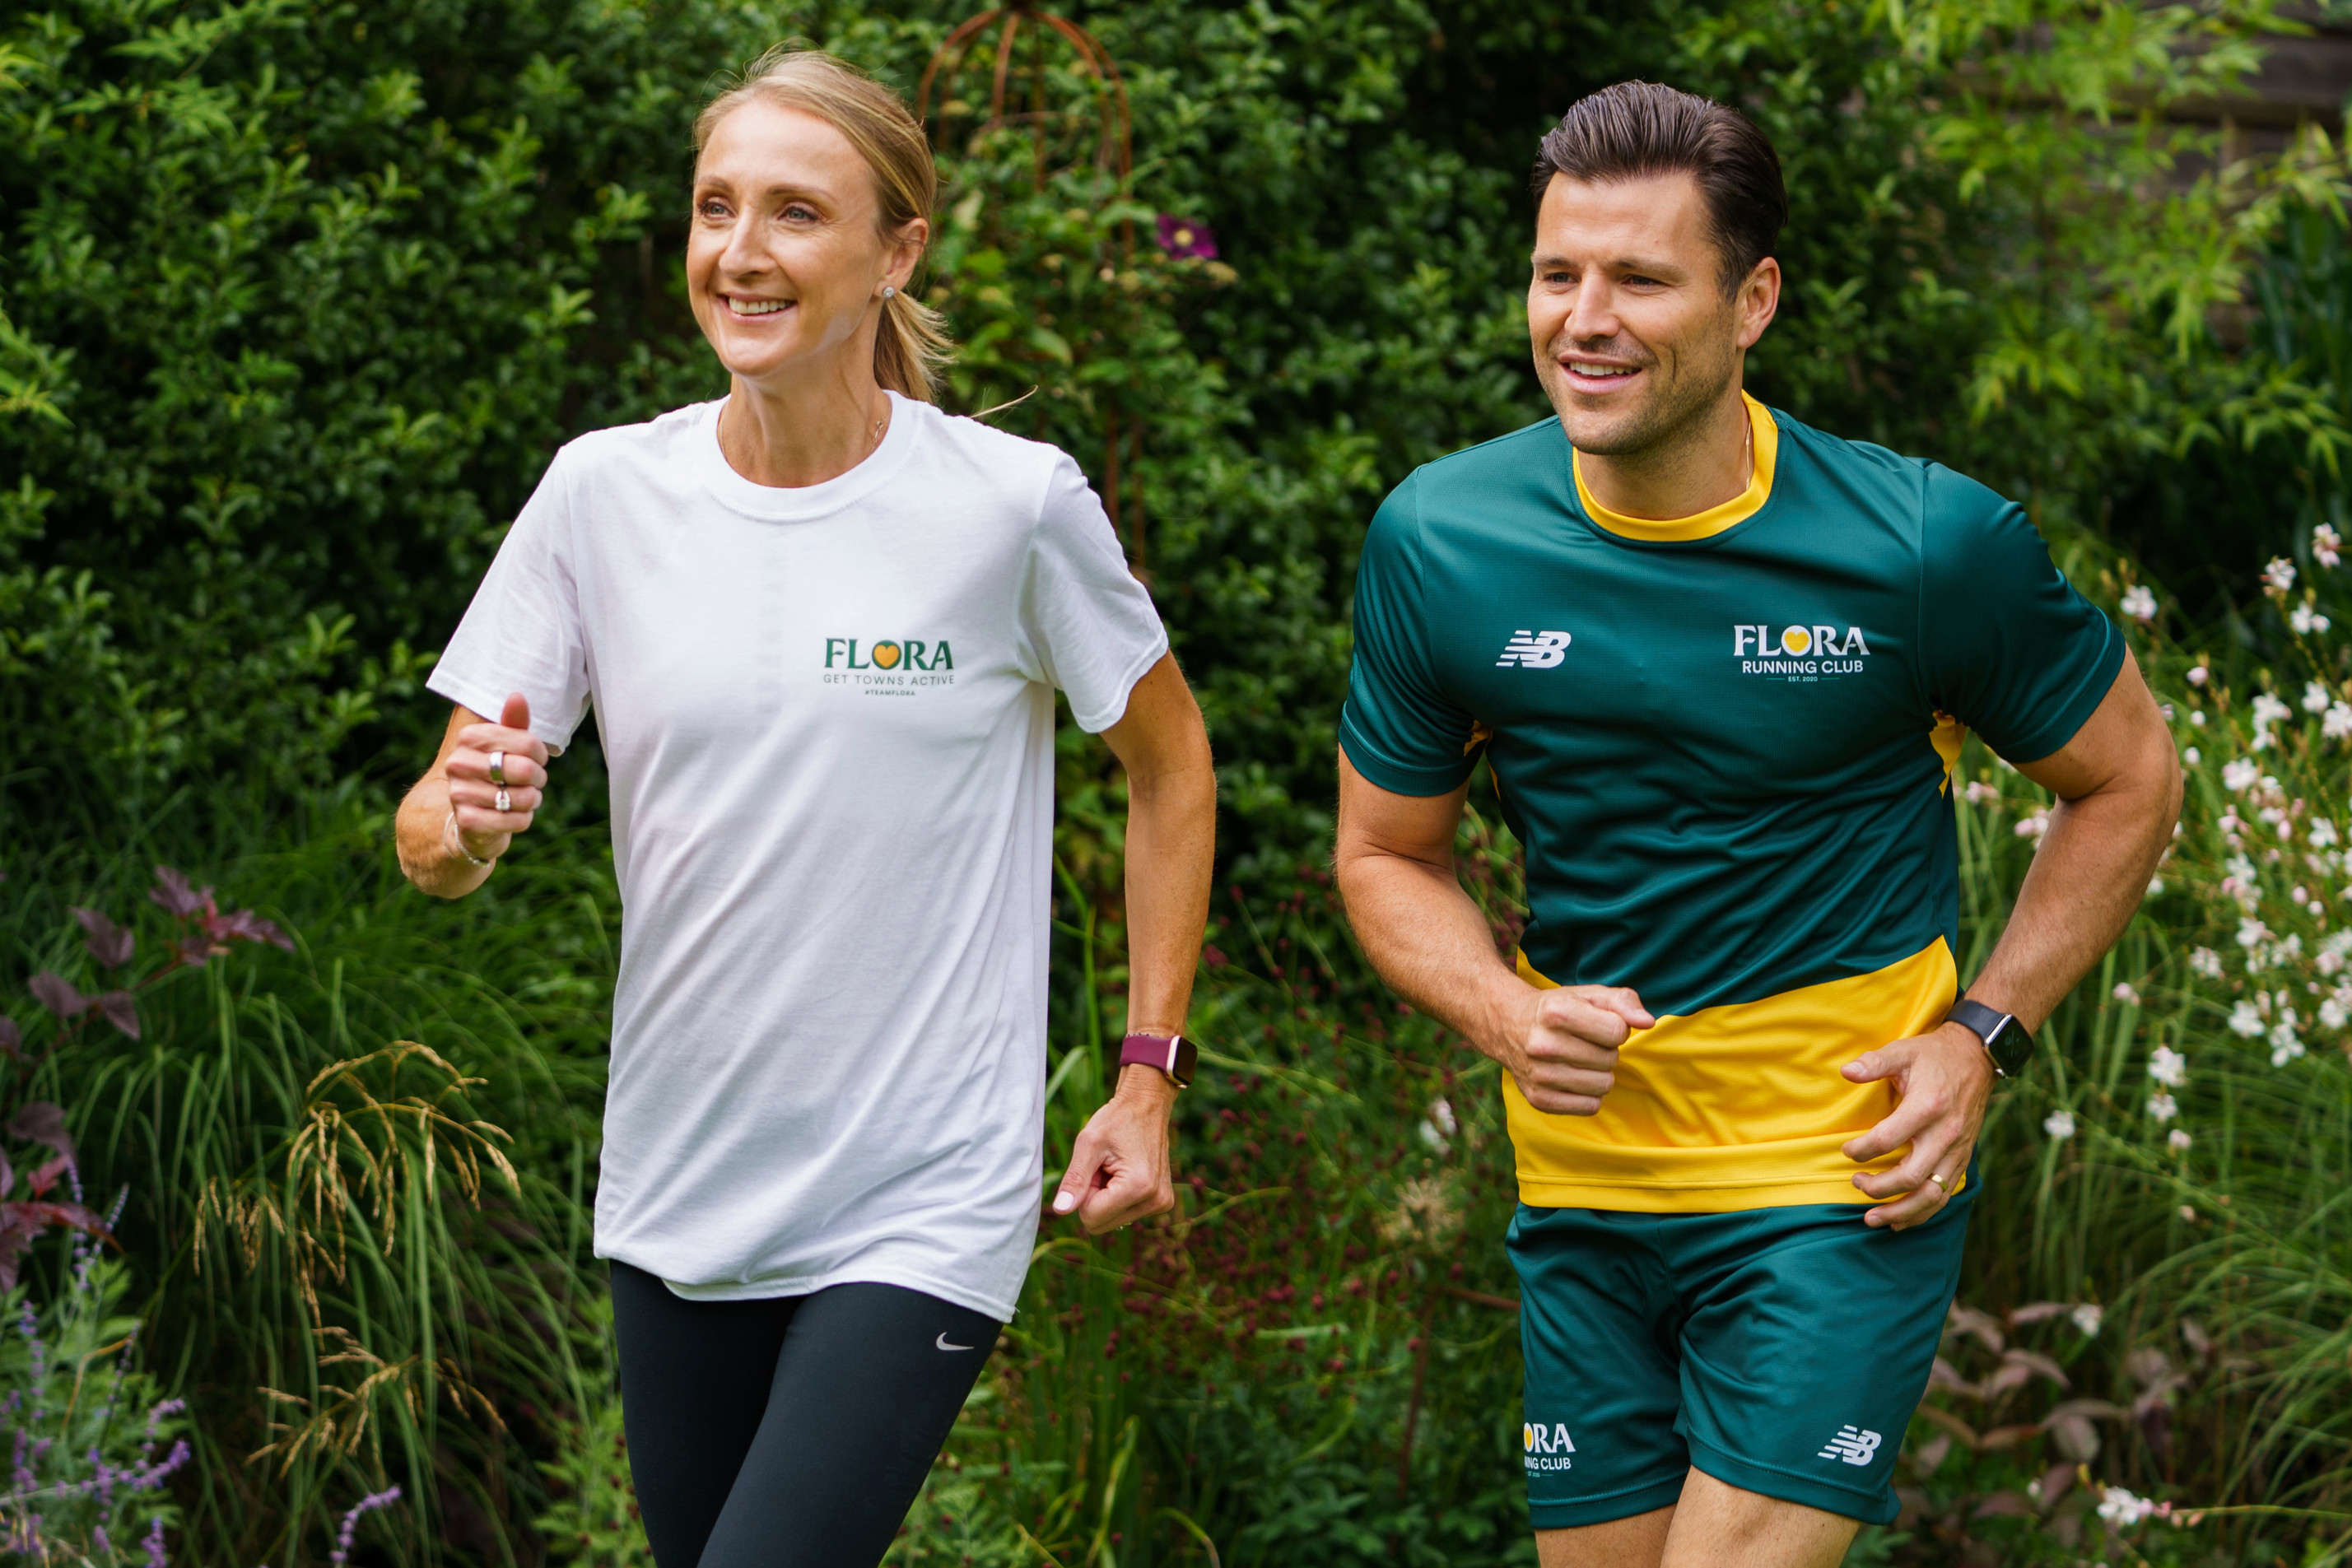 Mark Wright ‘so pumped’ to take on first ever London Marathon with coaching from Paula Radcliffe